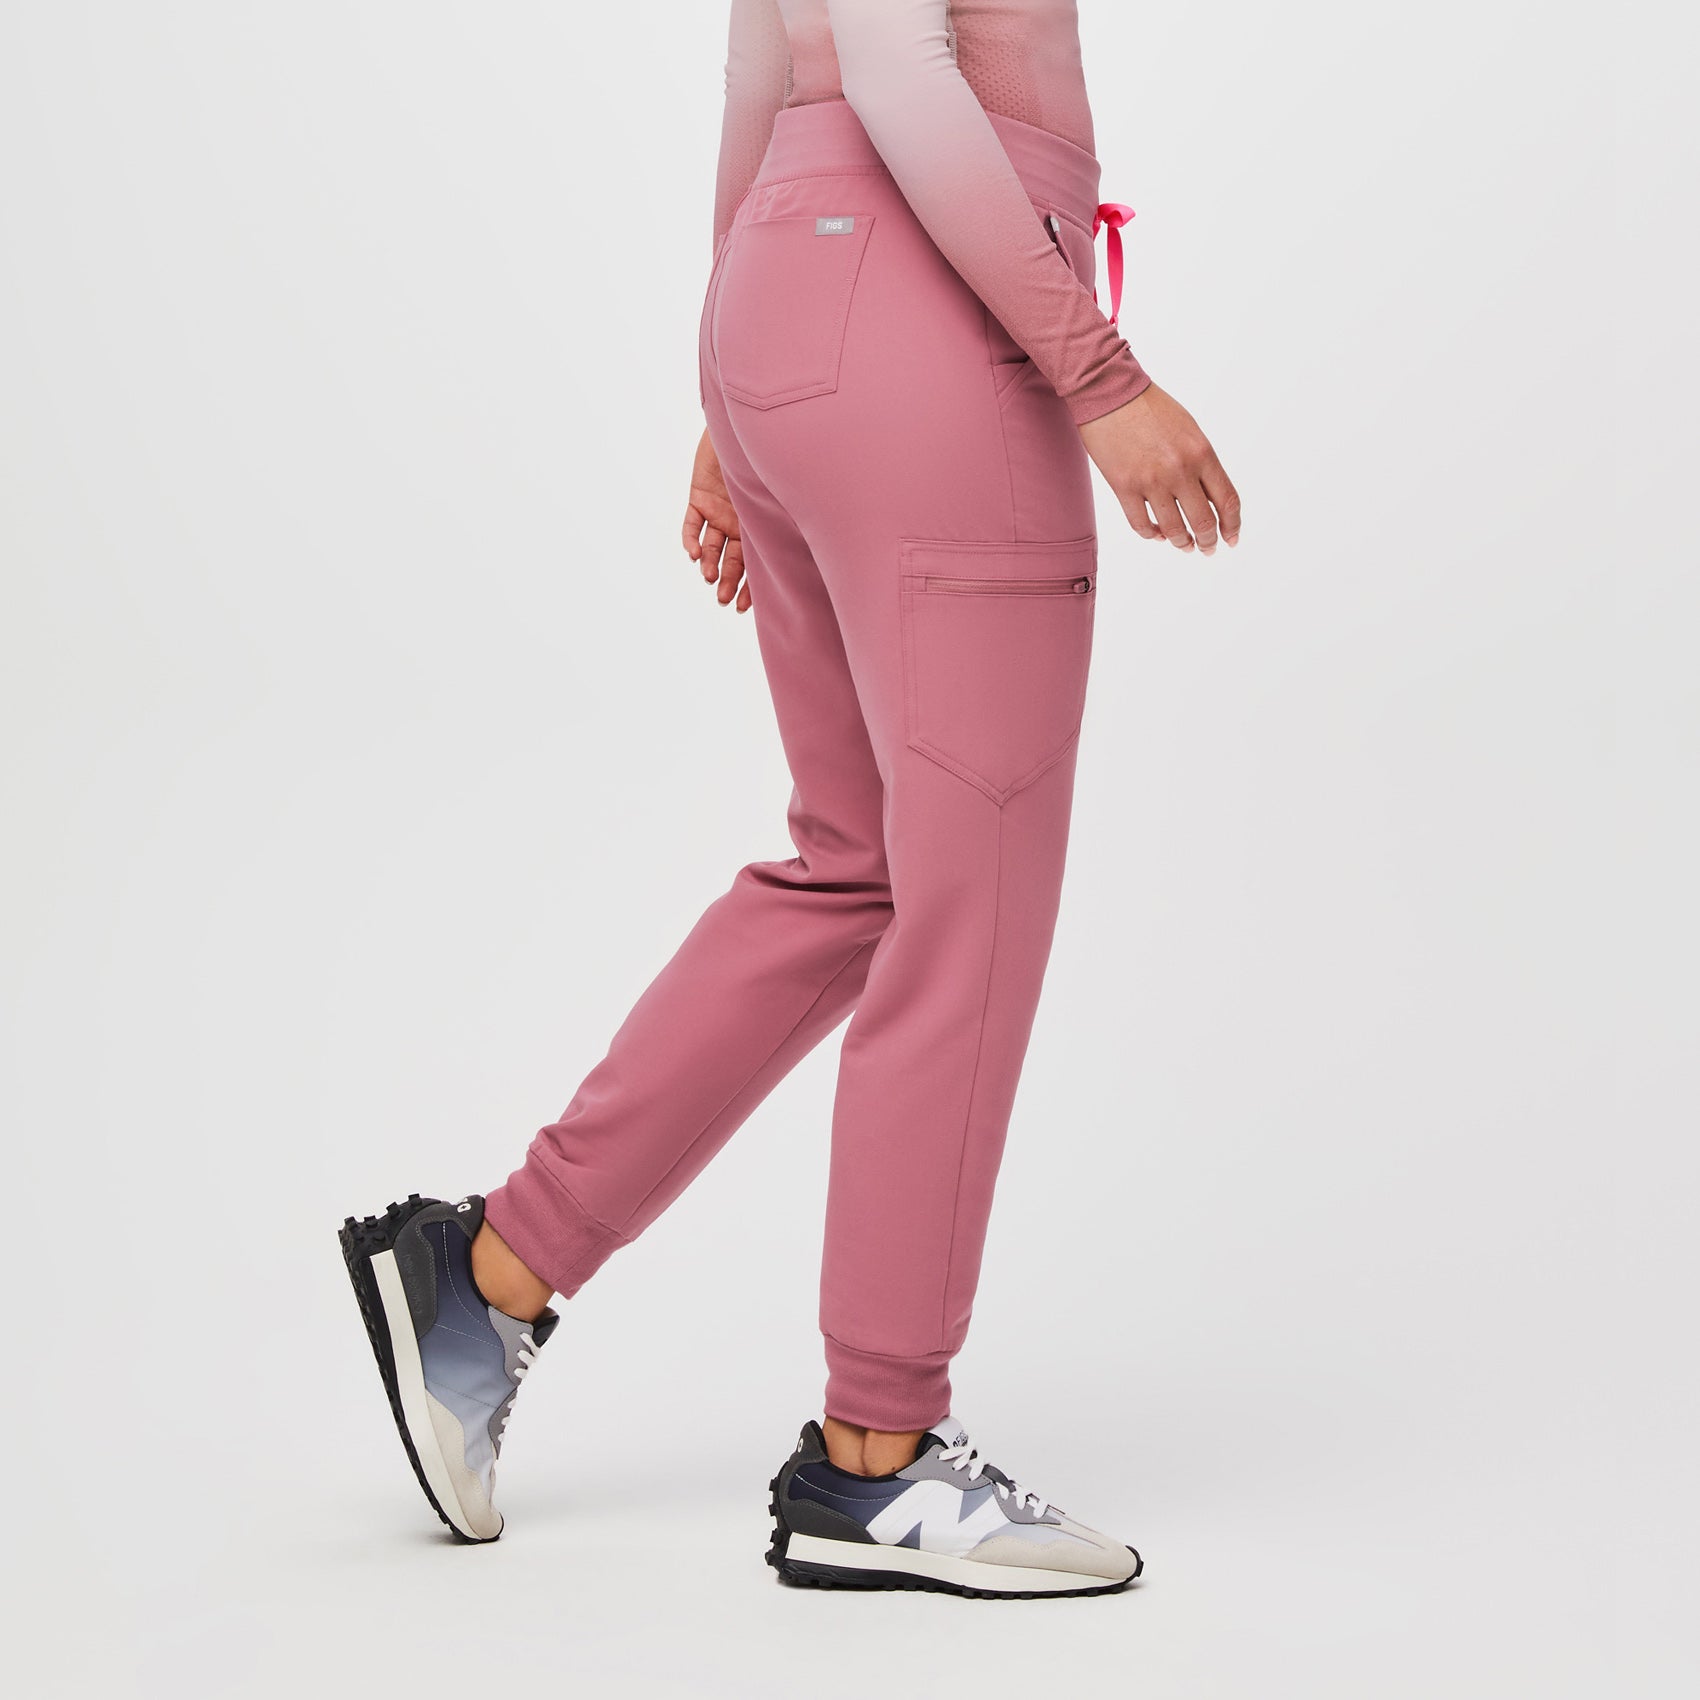 FIGS Zamora joggers in Ultra Rose Size undefined - $45 New With